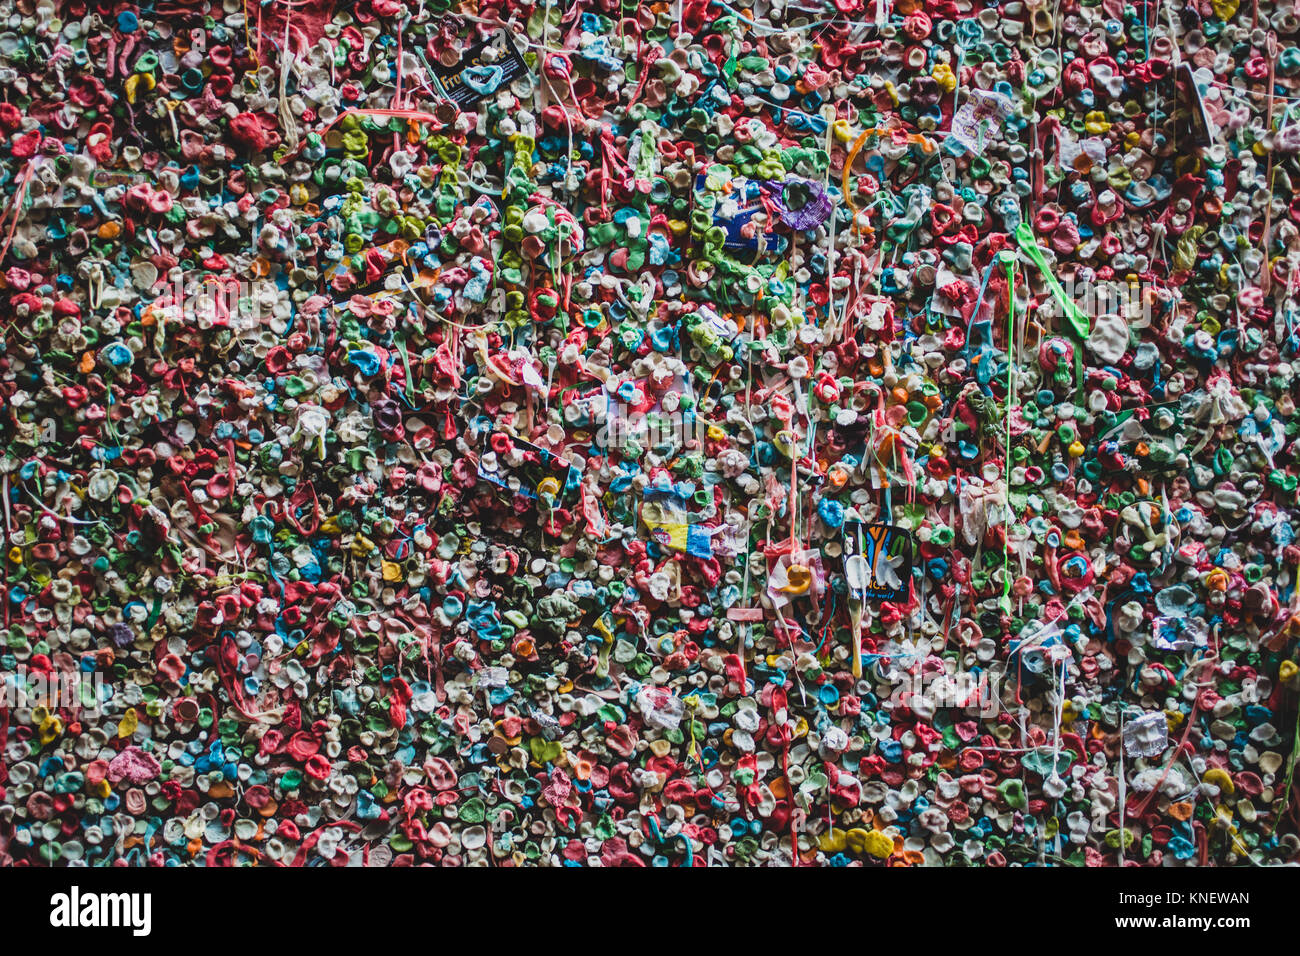 The famous gum wall at Pike Place Market. Stock Photo